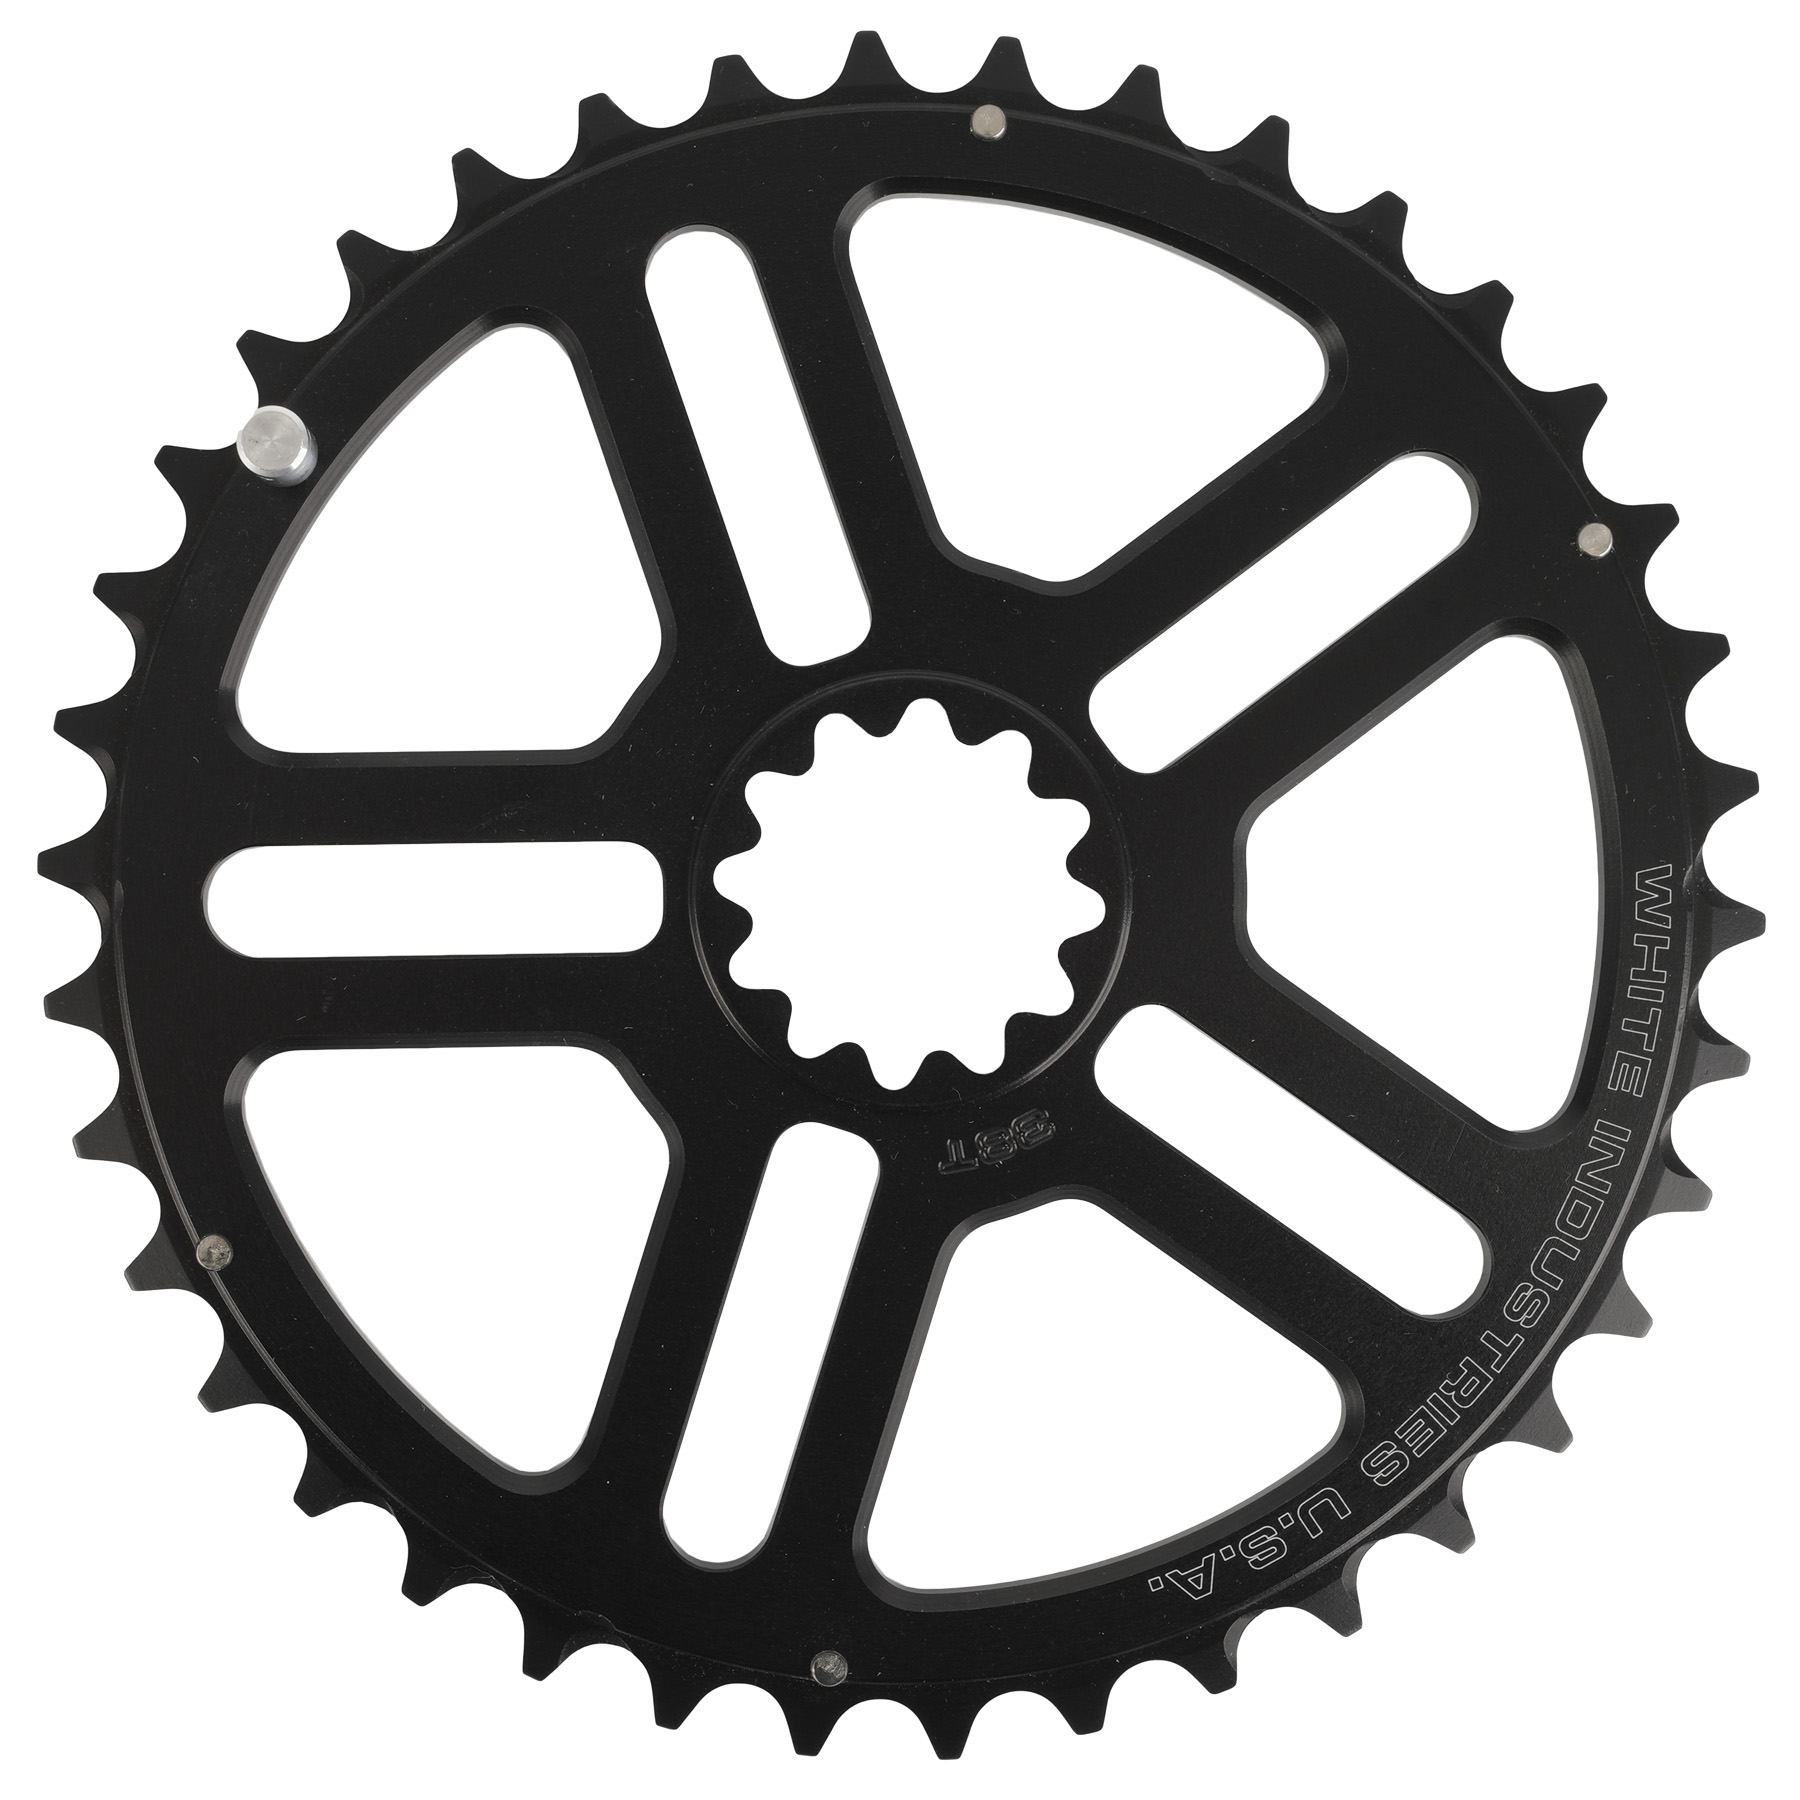 Productfoto van White Industries VBC outer Chainring for Square Crank - black